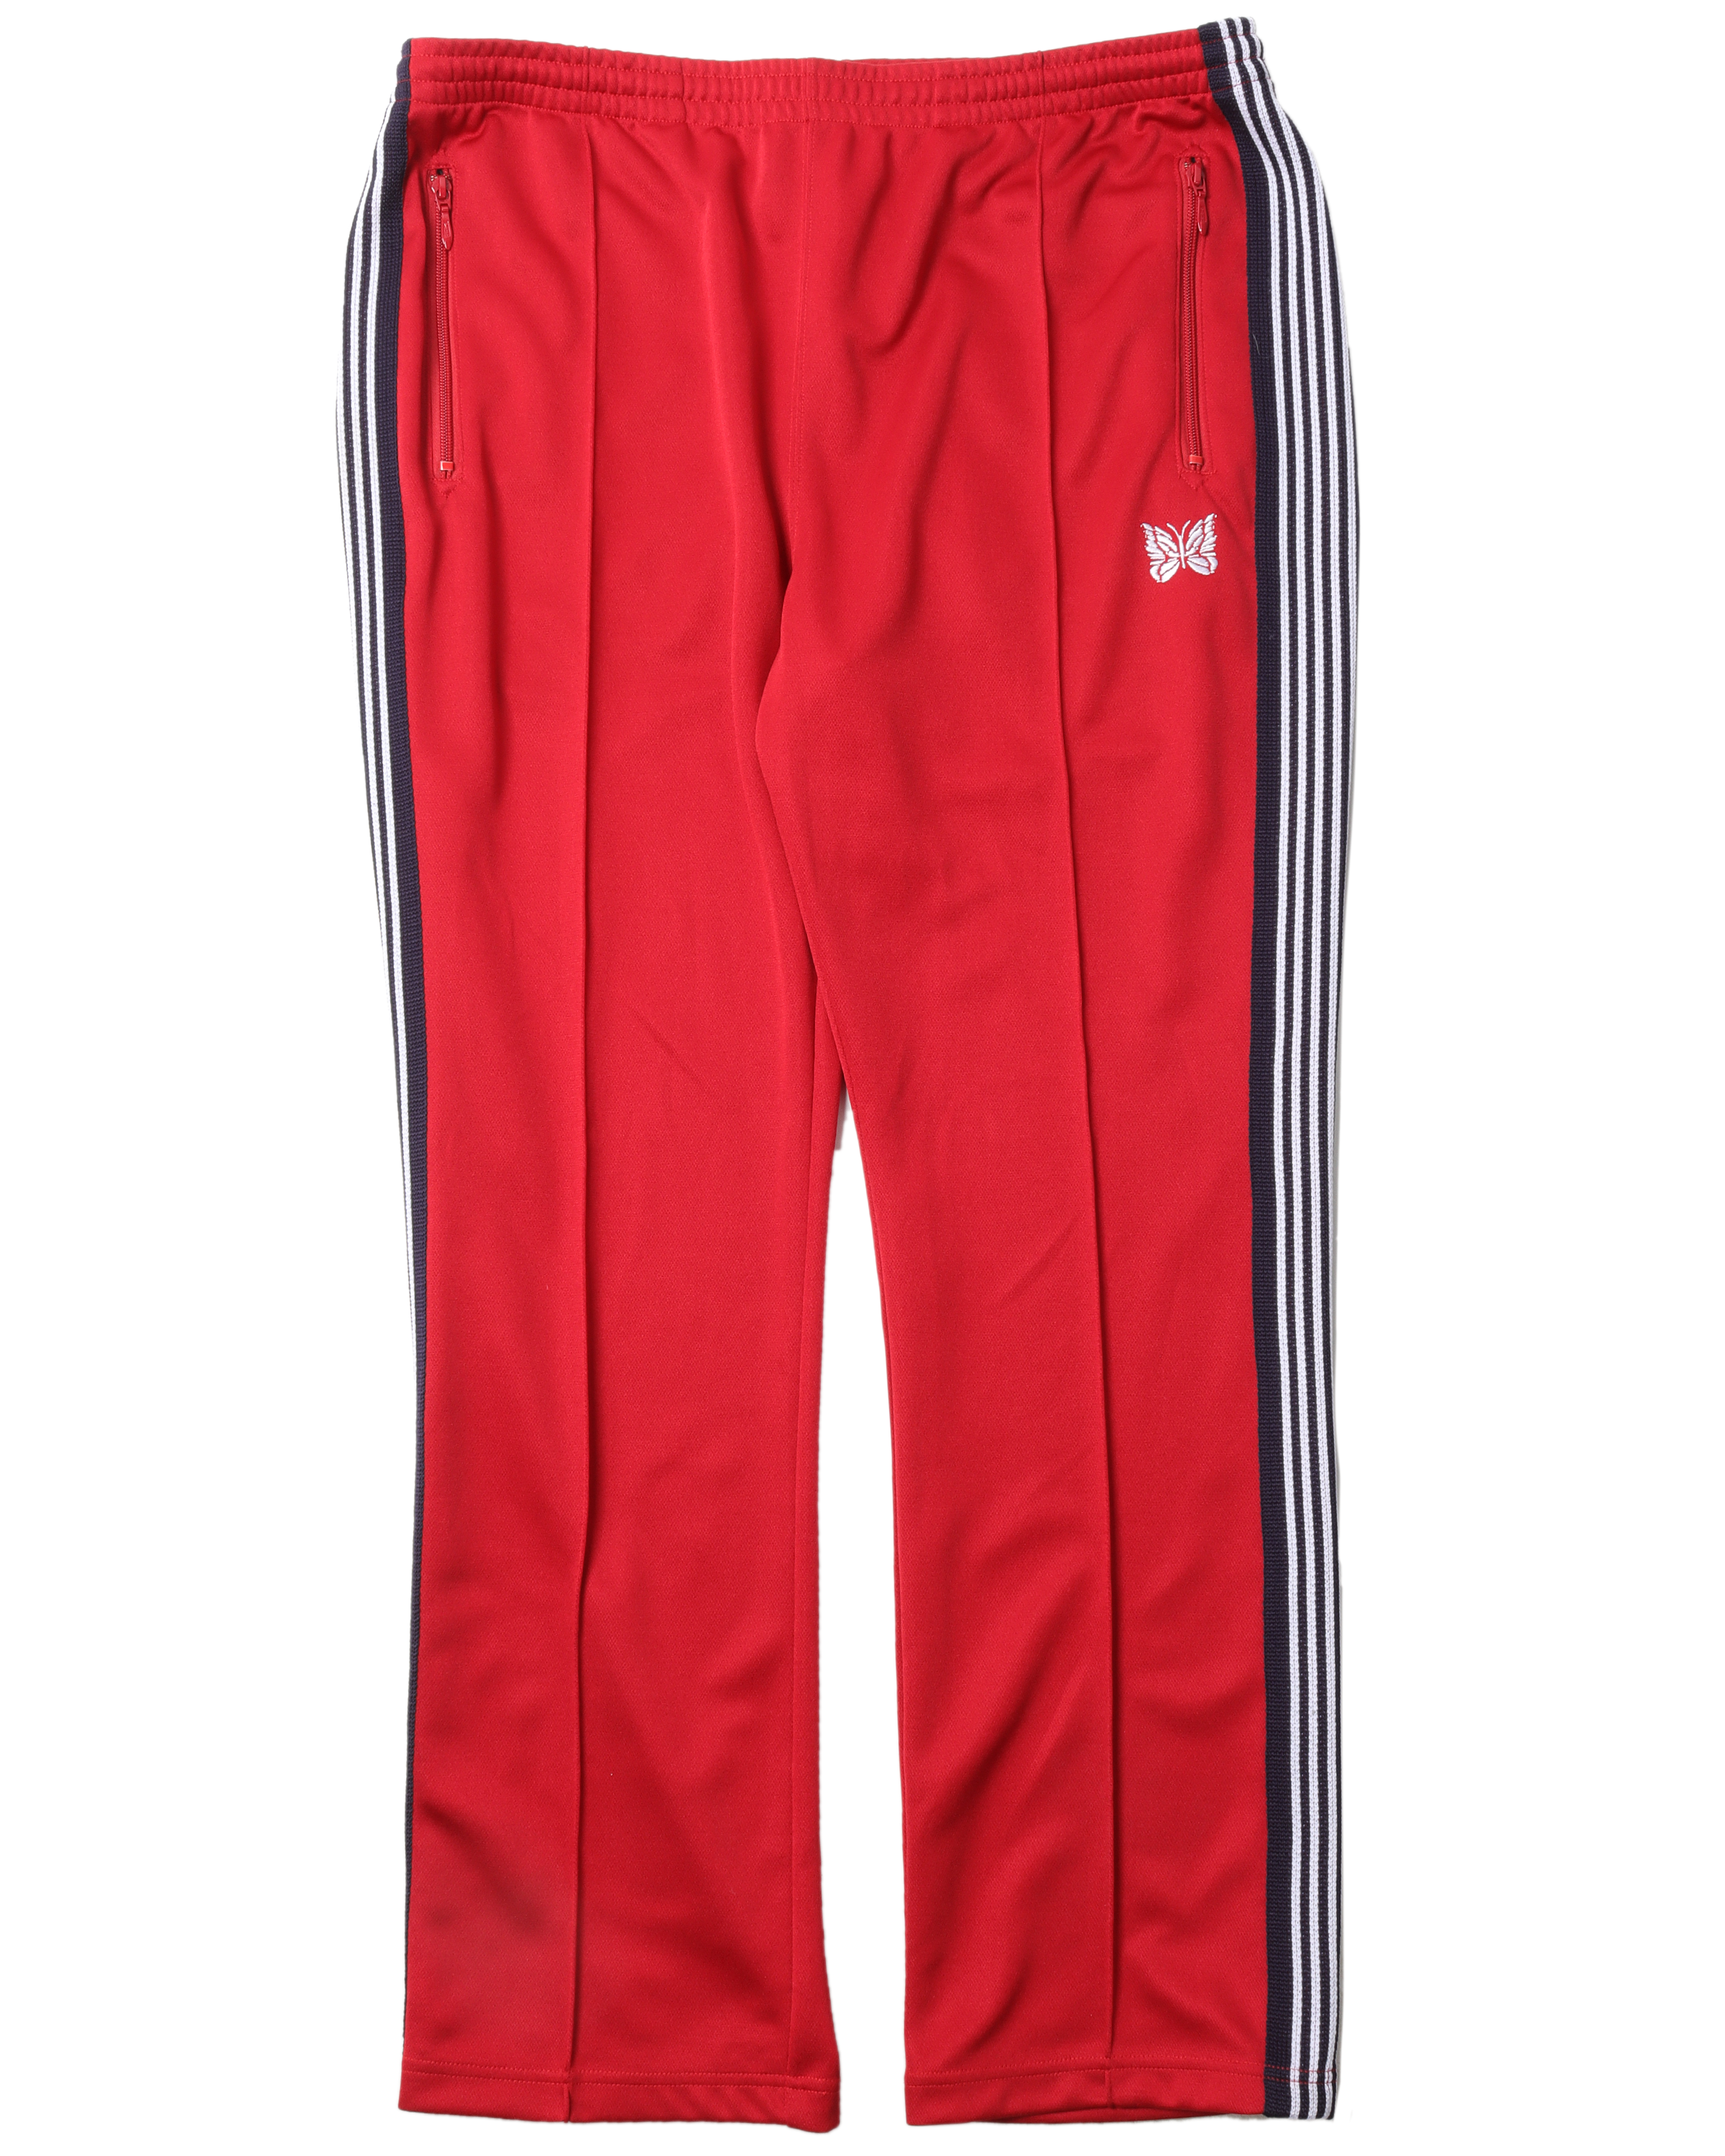 Red Track Suit Pant